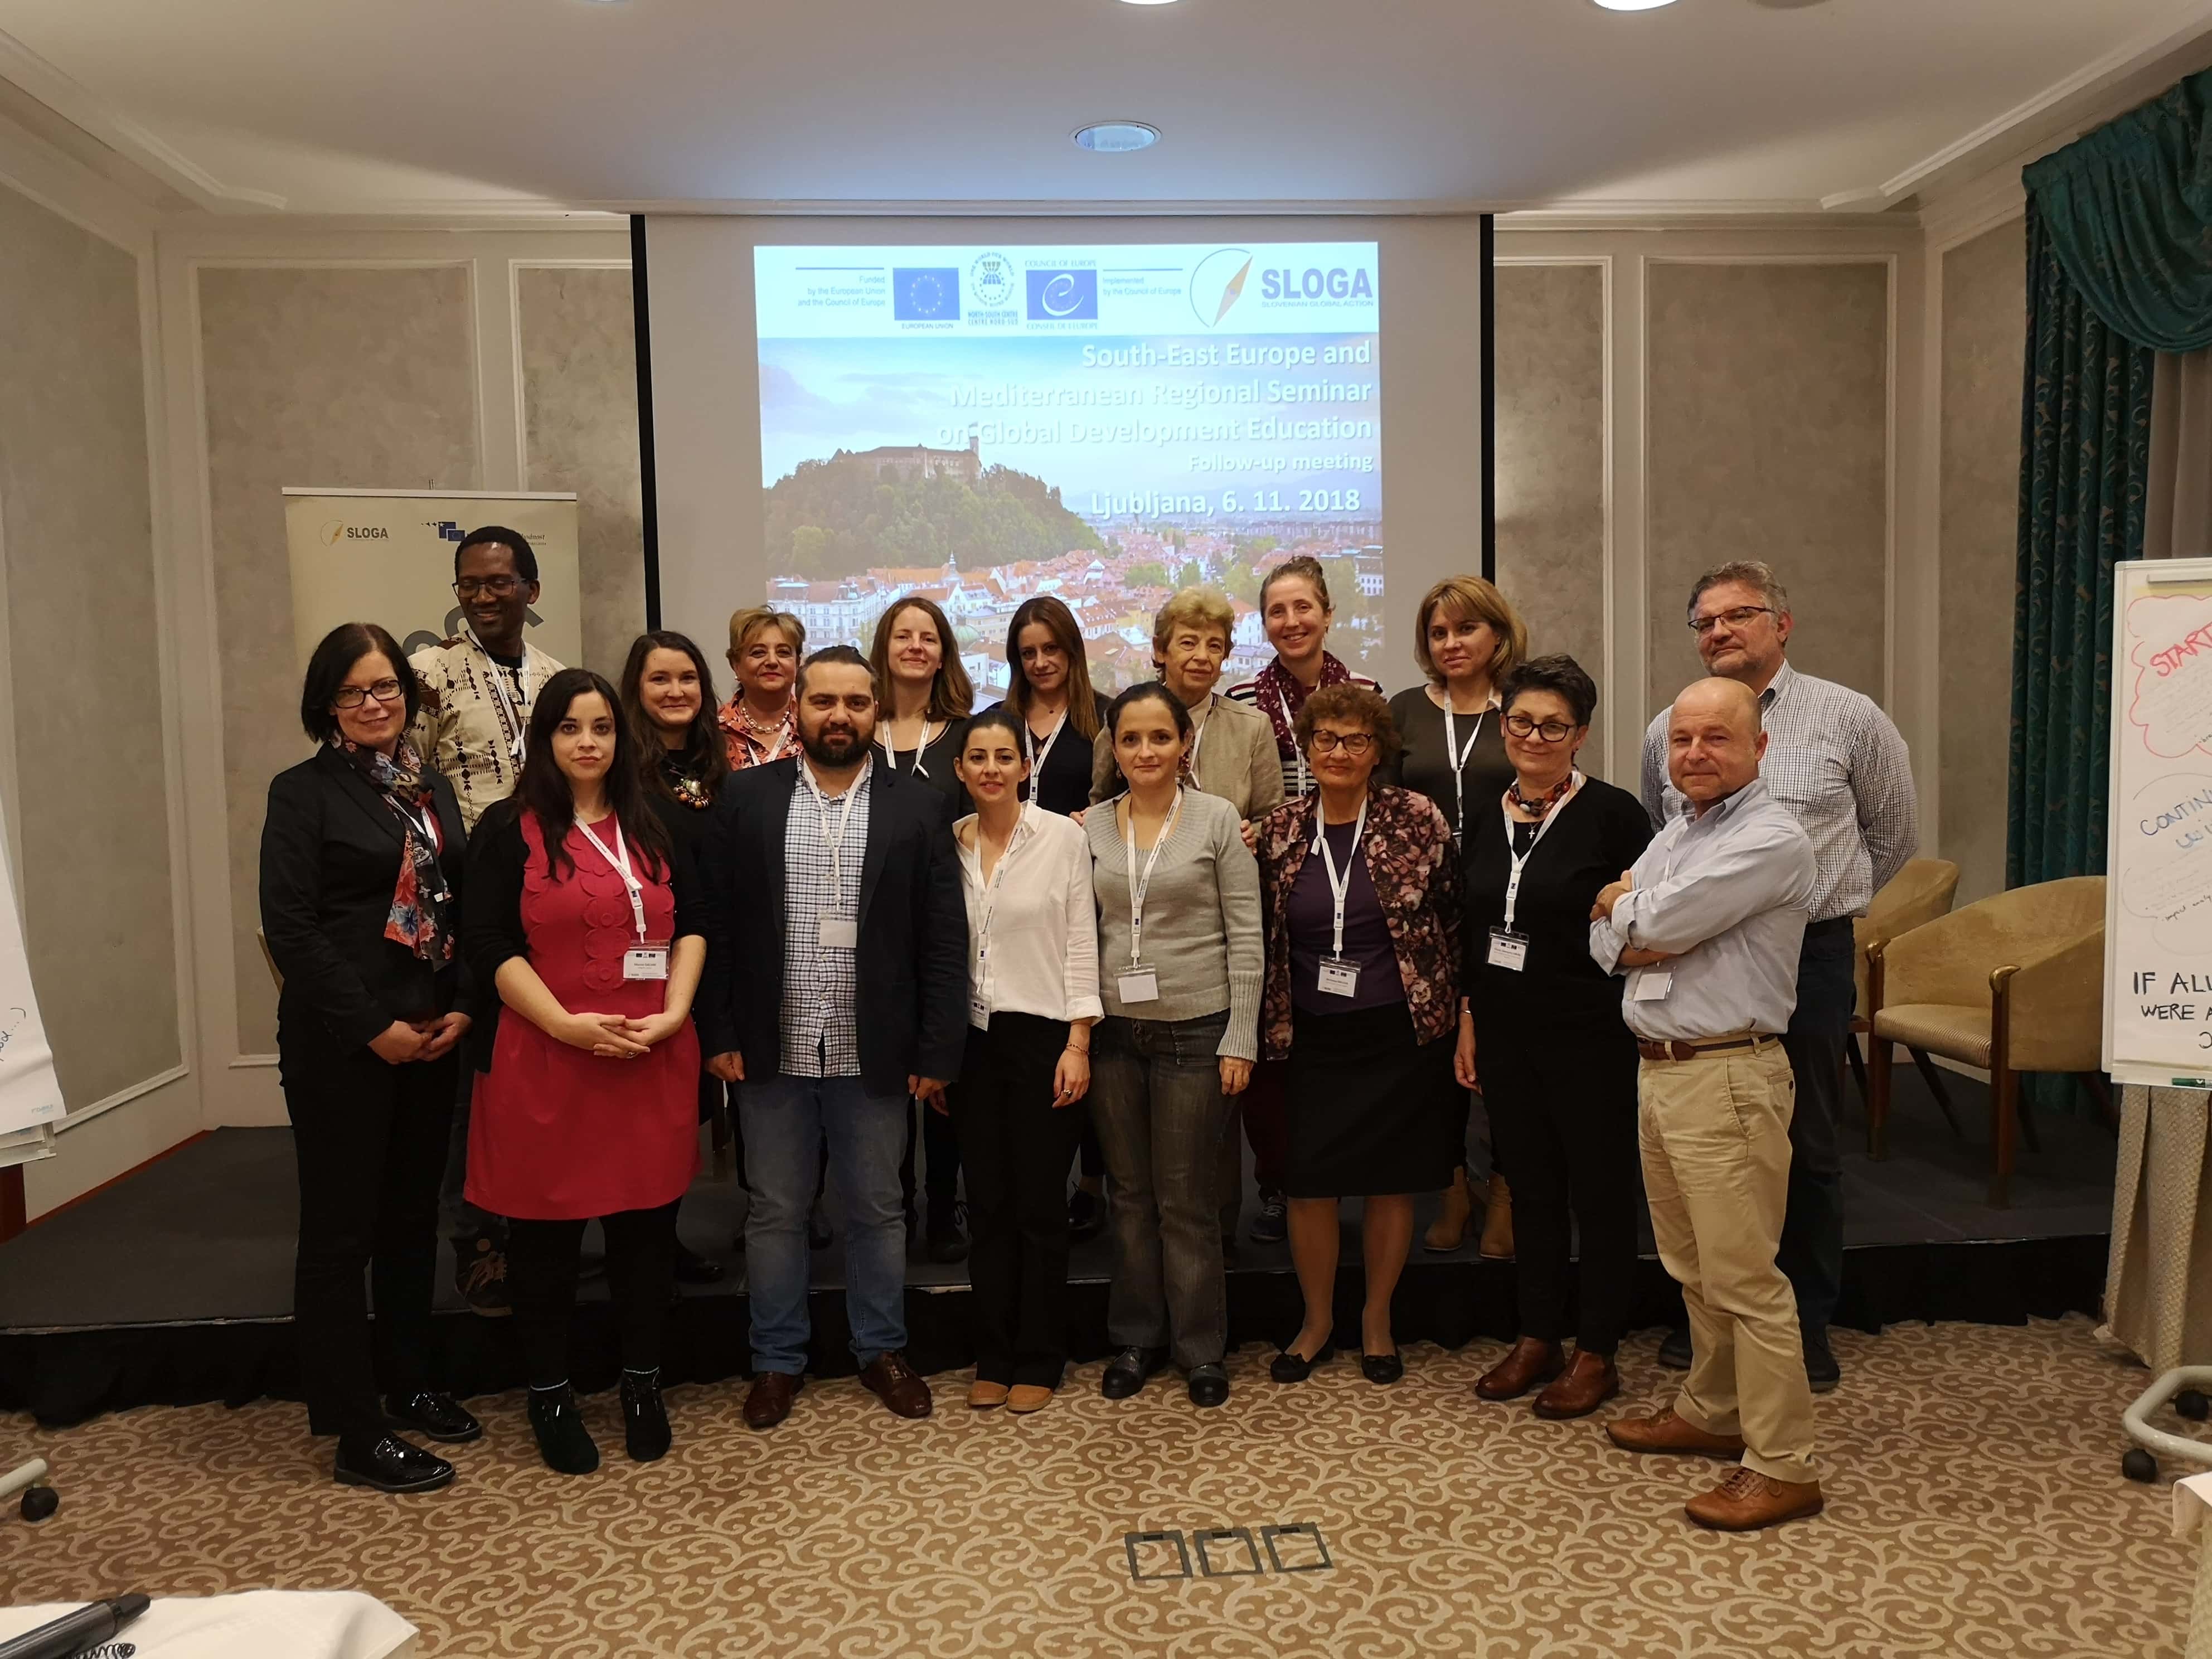 The South-East Europe and Mediterranean Regional Seminar on Global Development Education (GDE) follow-up meeting MATERIALS